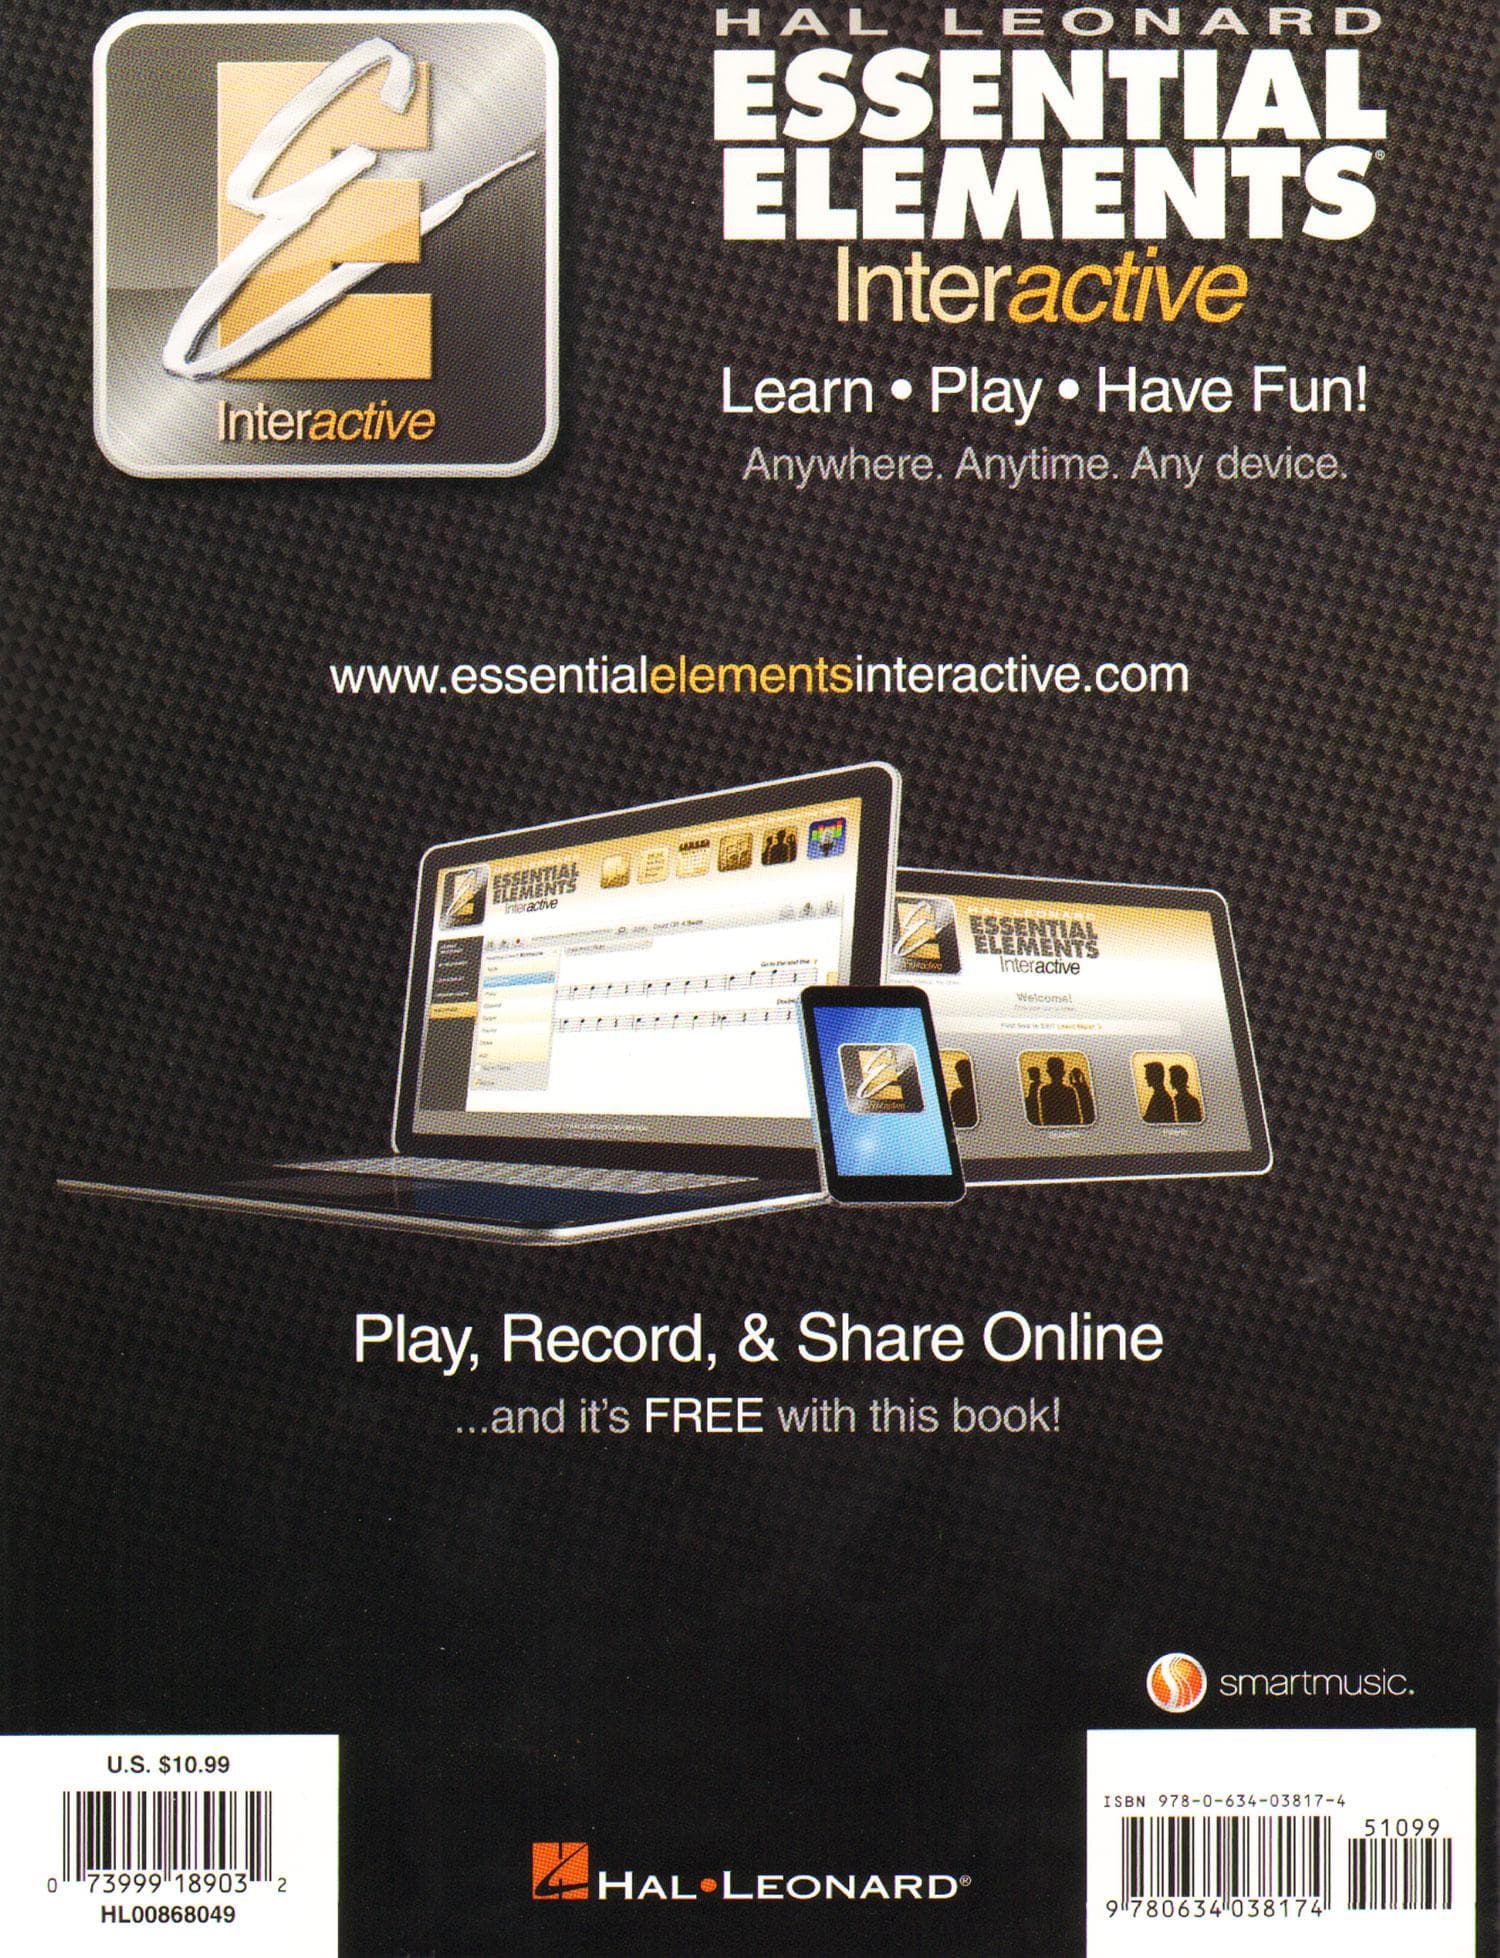 Essential Elements Interactive (formerly 2000) for Strings - Violin Book 2 - by Allen/Gillespie/Hayes - Hal Leonard Publication